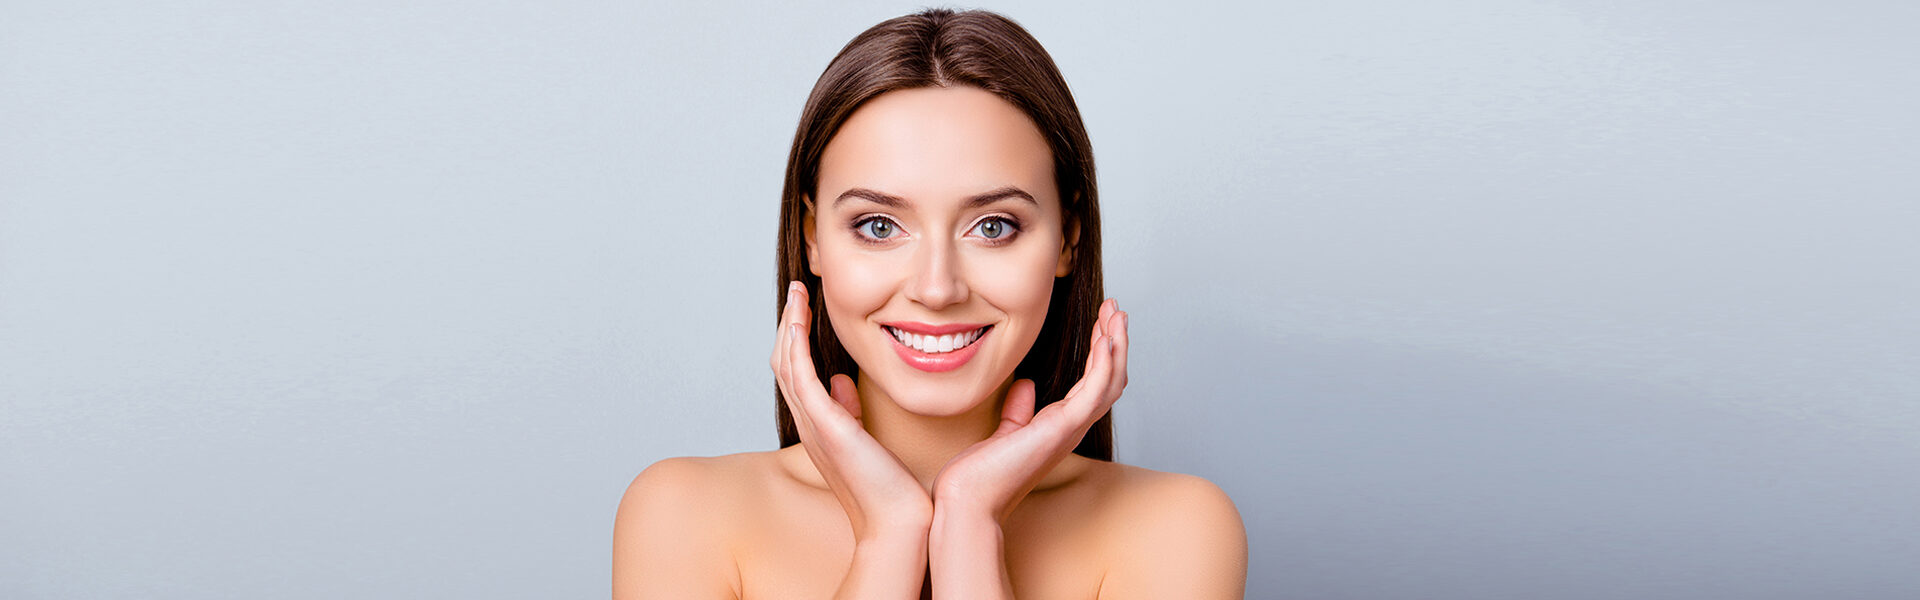 Cosmetic Dentistry In Burnaby, BC